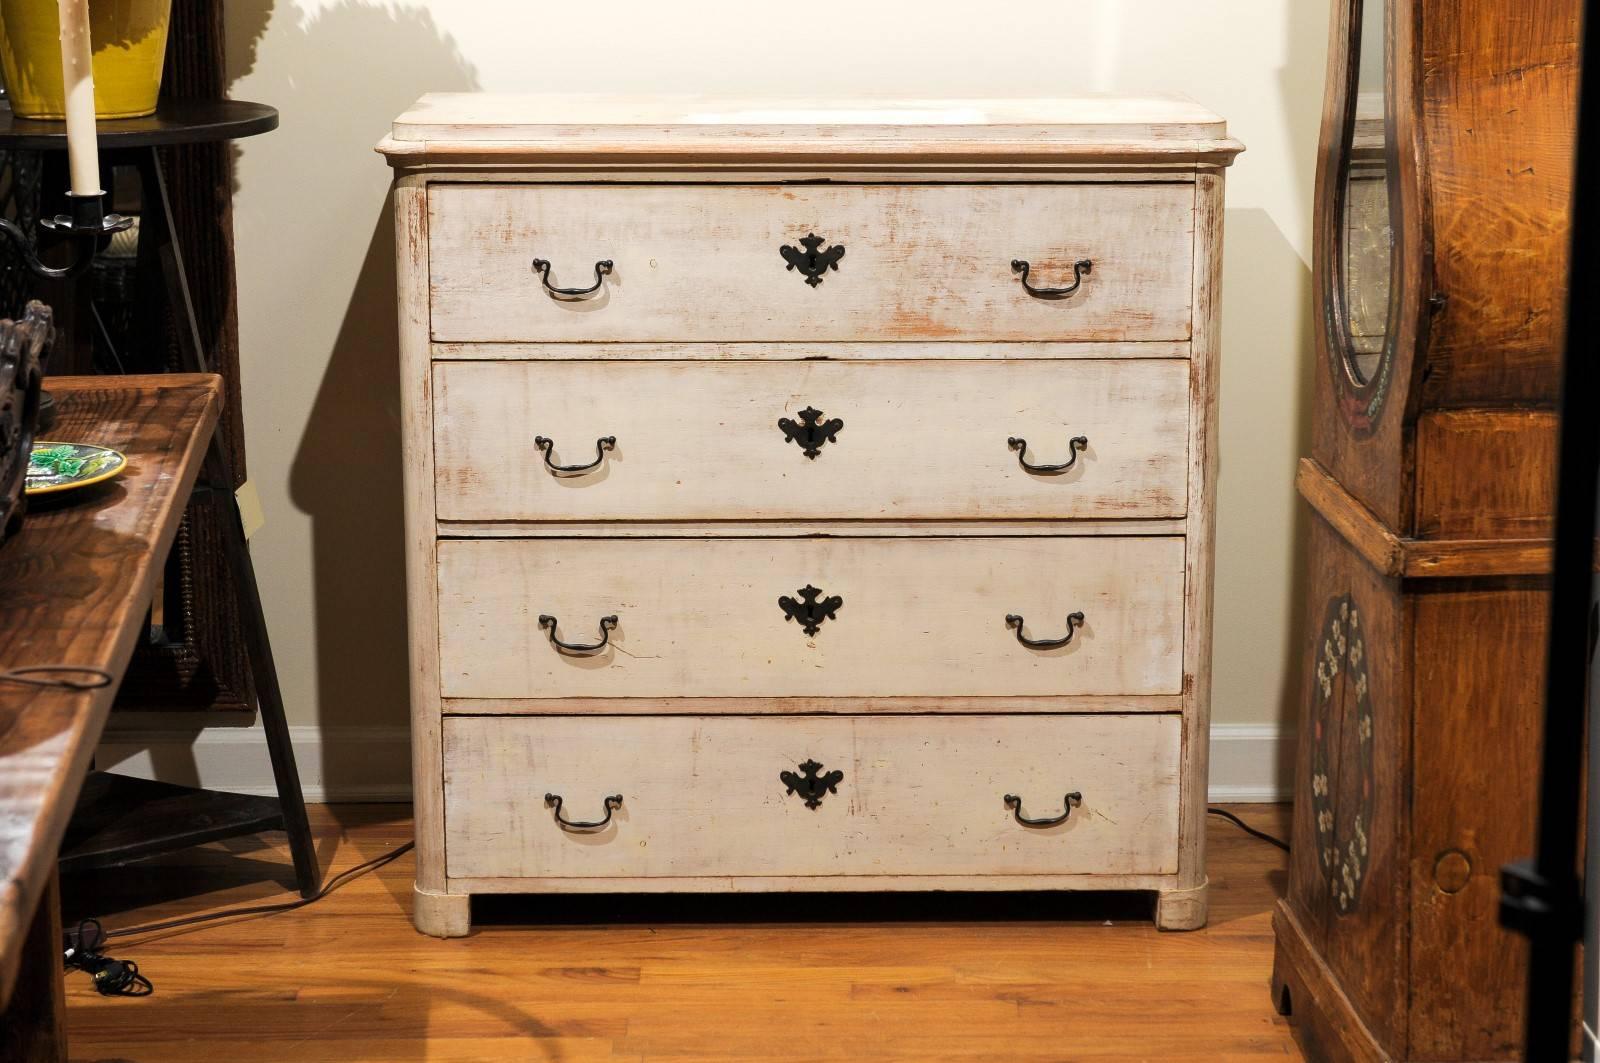 This English pine chest is finished in a light grey paint and has four drawers. The chest has classic swan neck pulls on each drawer.

